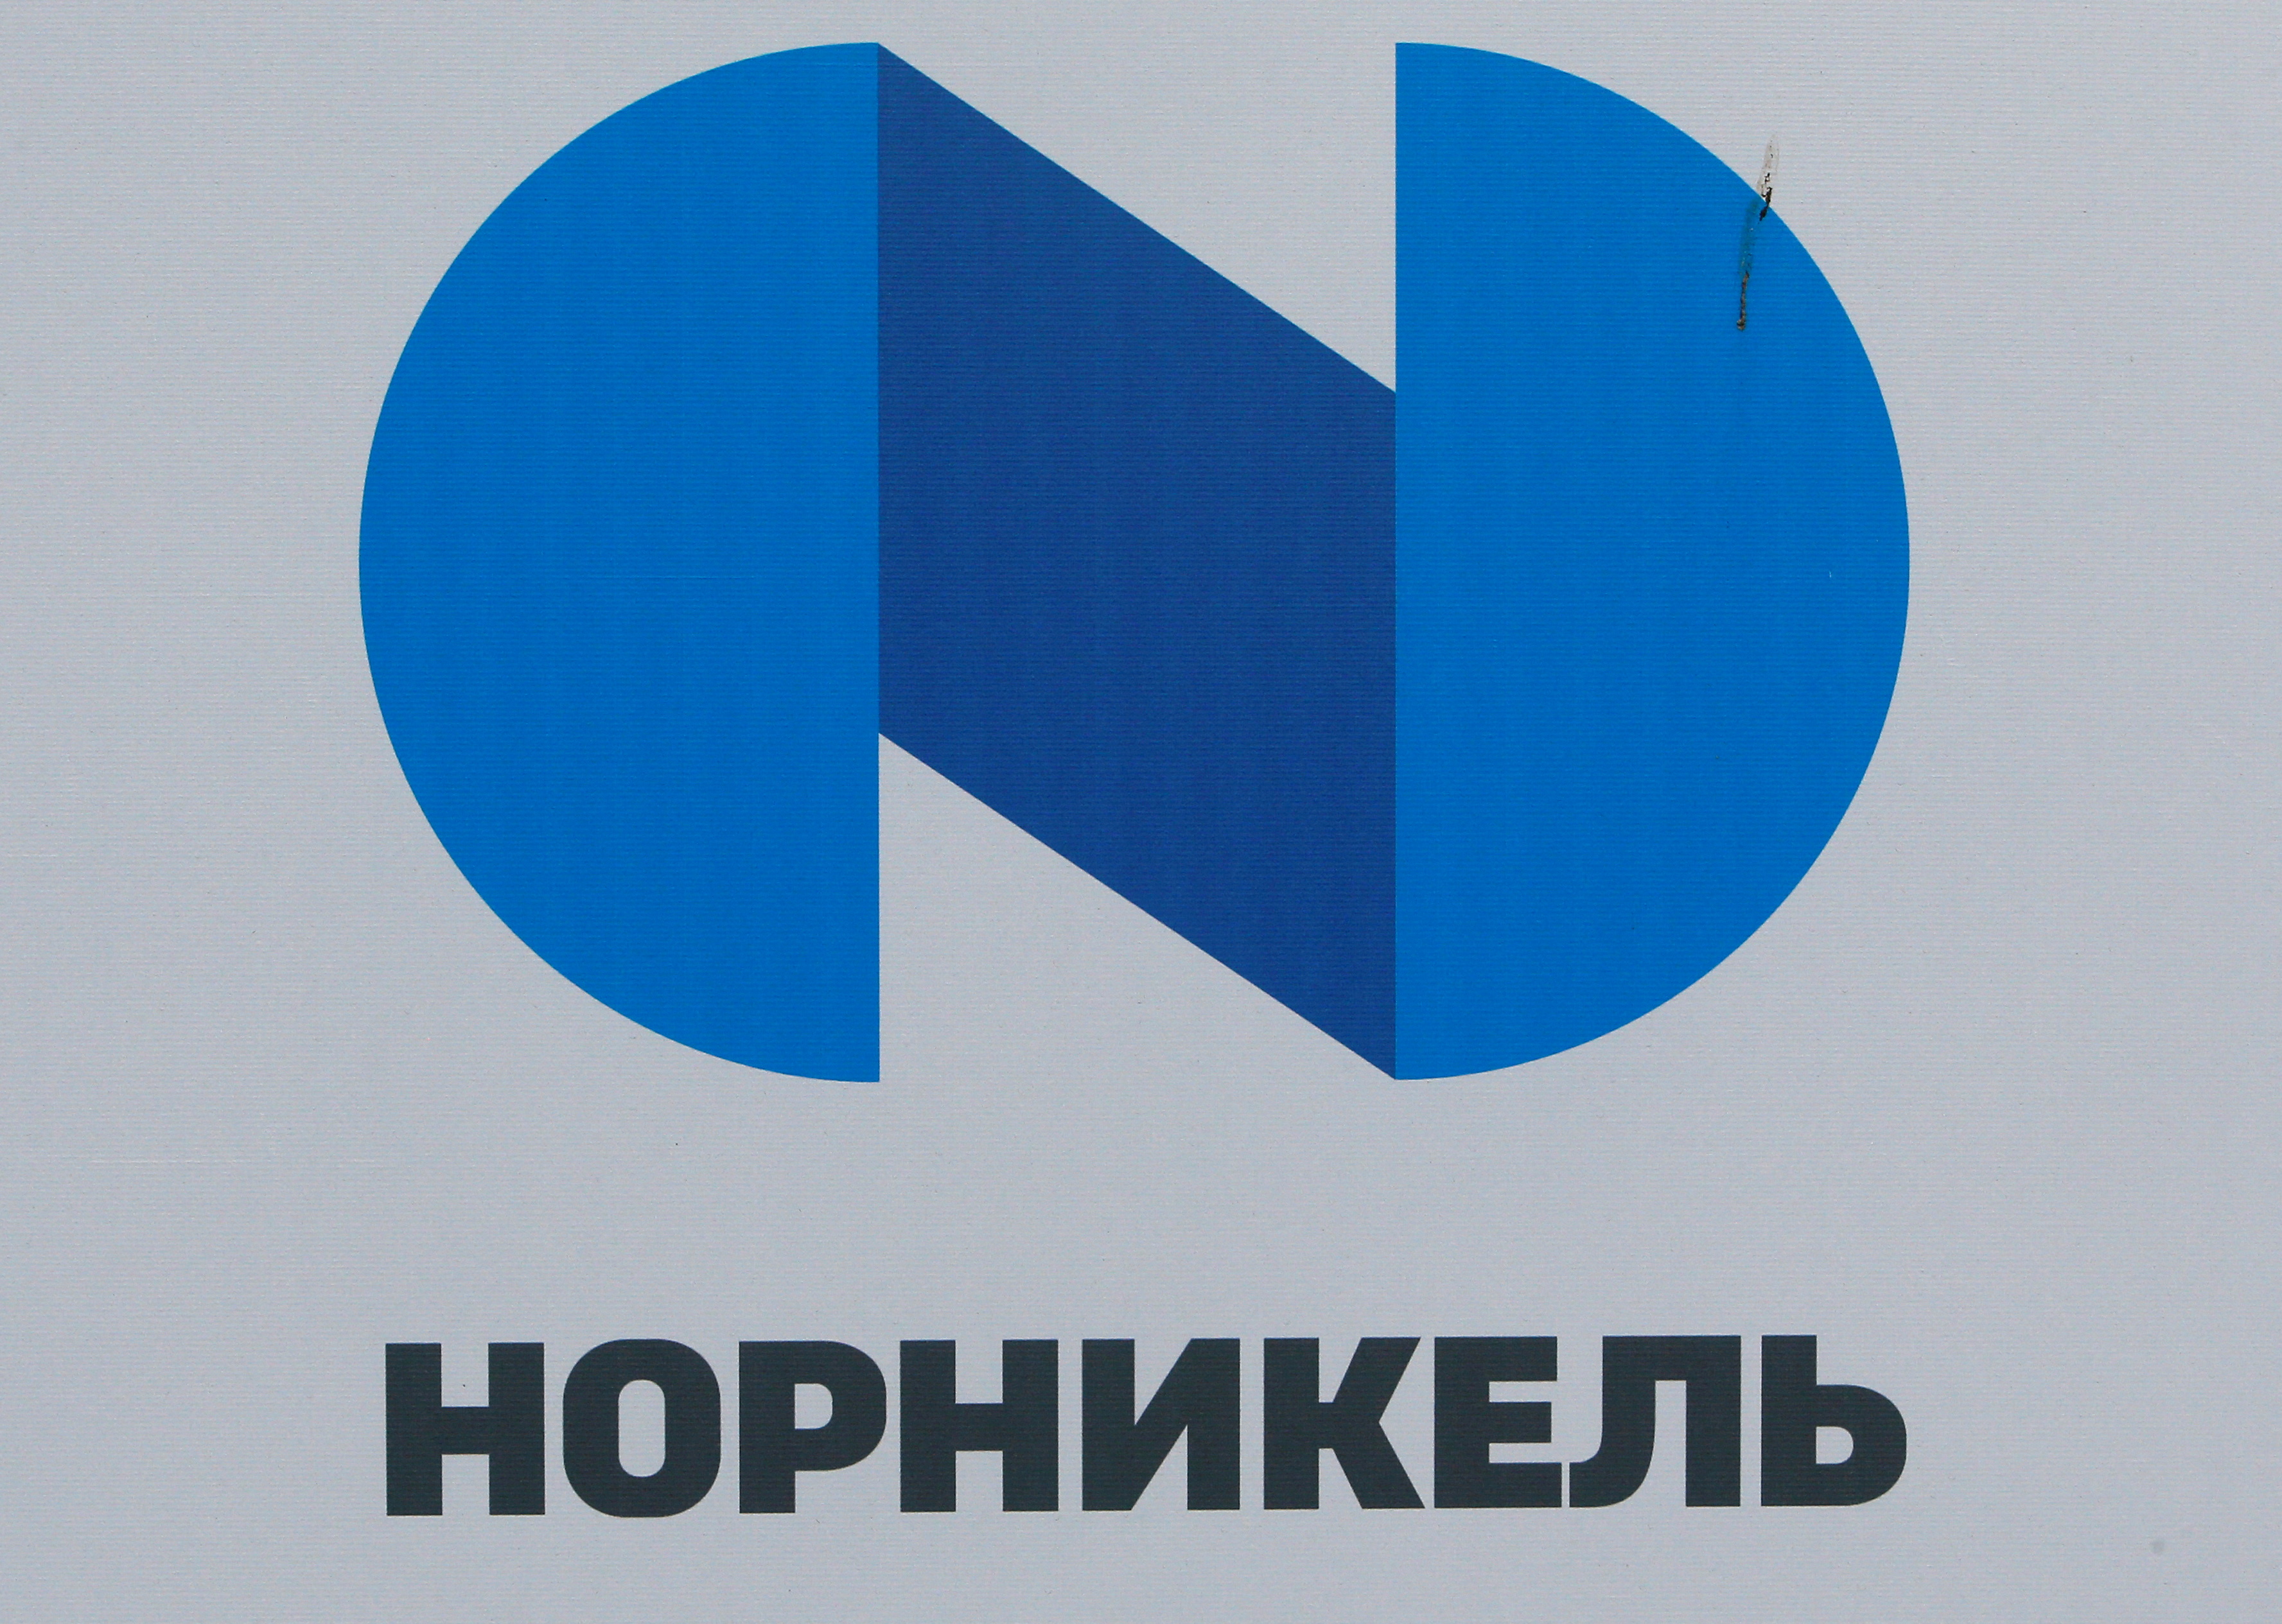 The logo of Russia's miner Nornickel is seen at the SPIEF 2017 in St. Petersburg